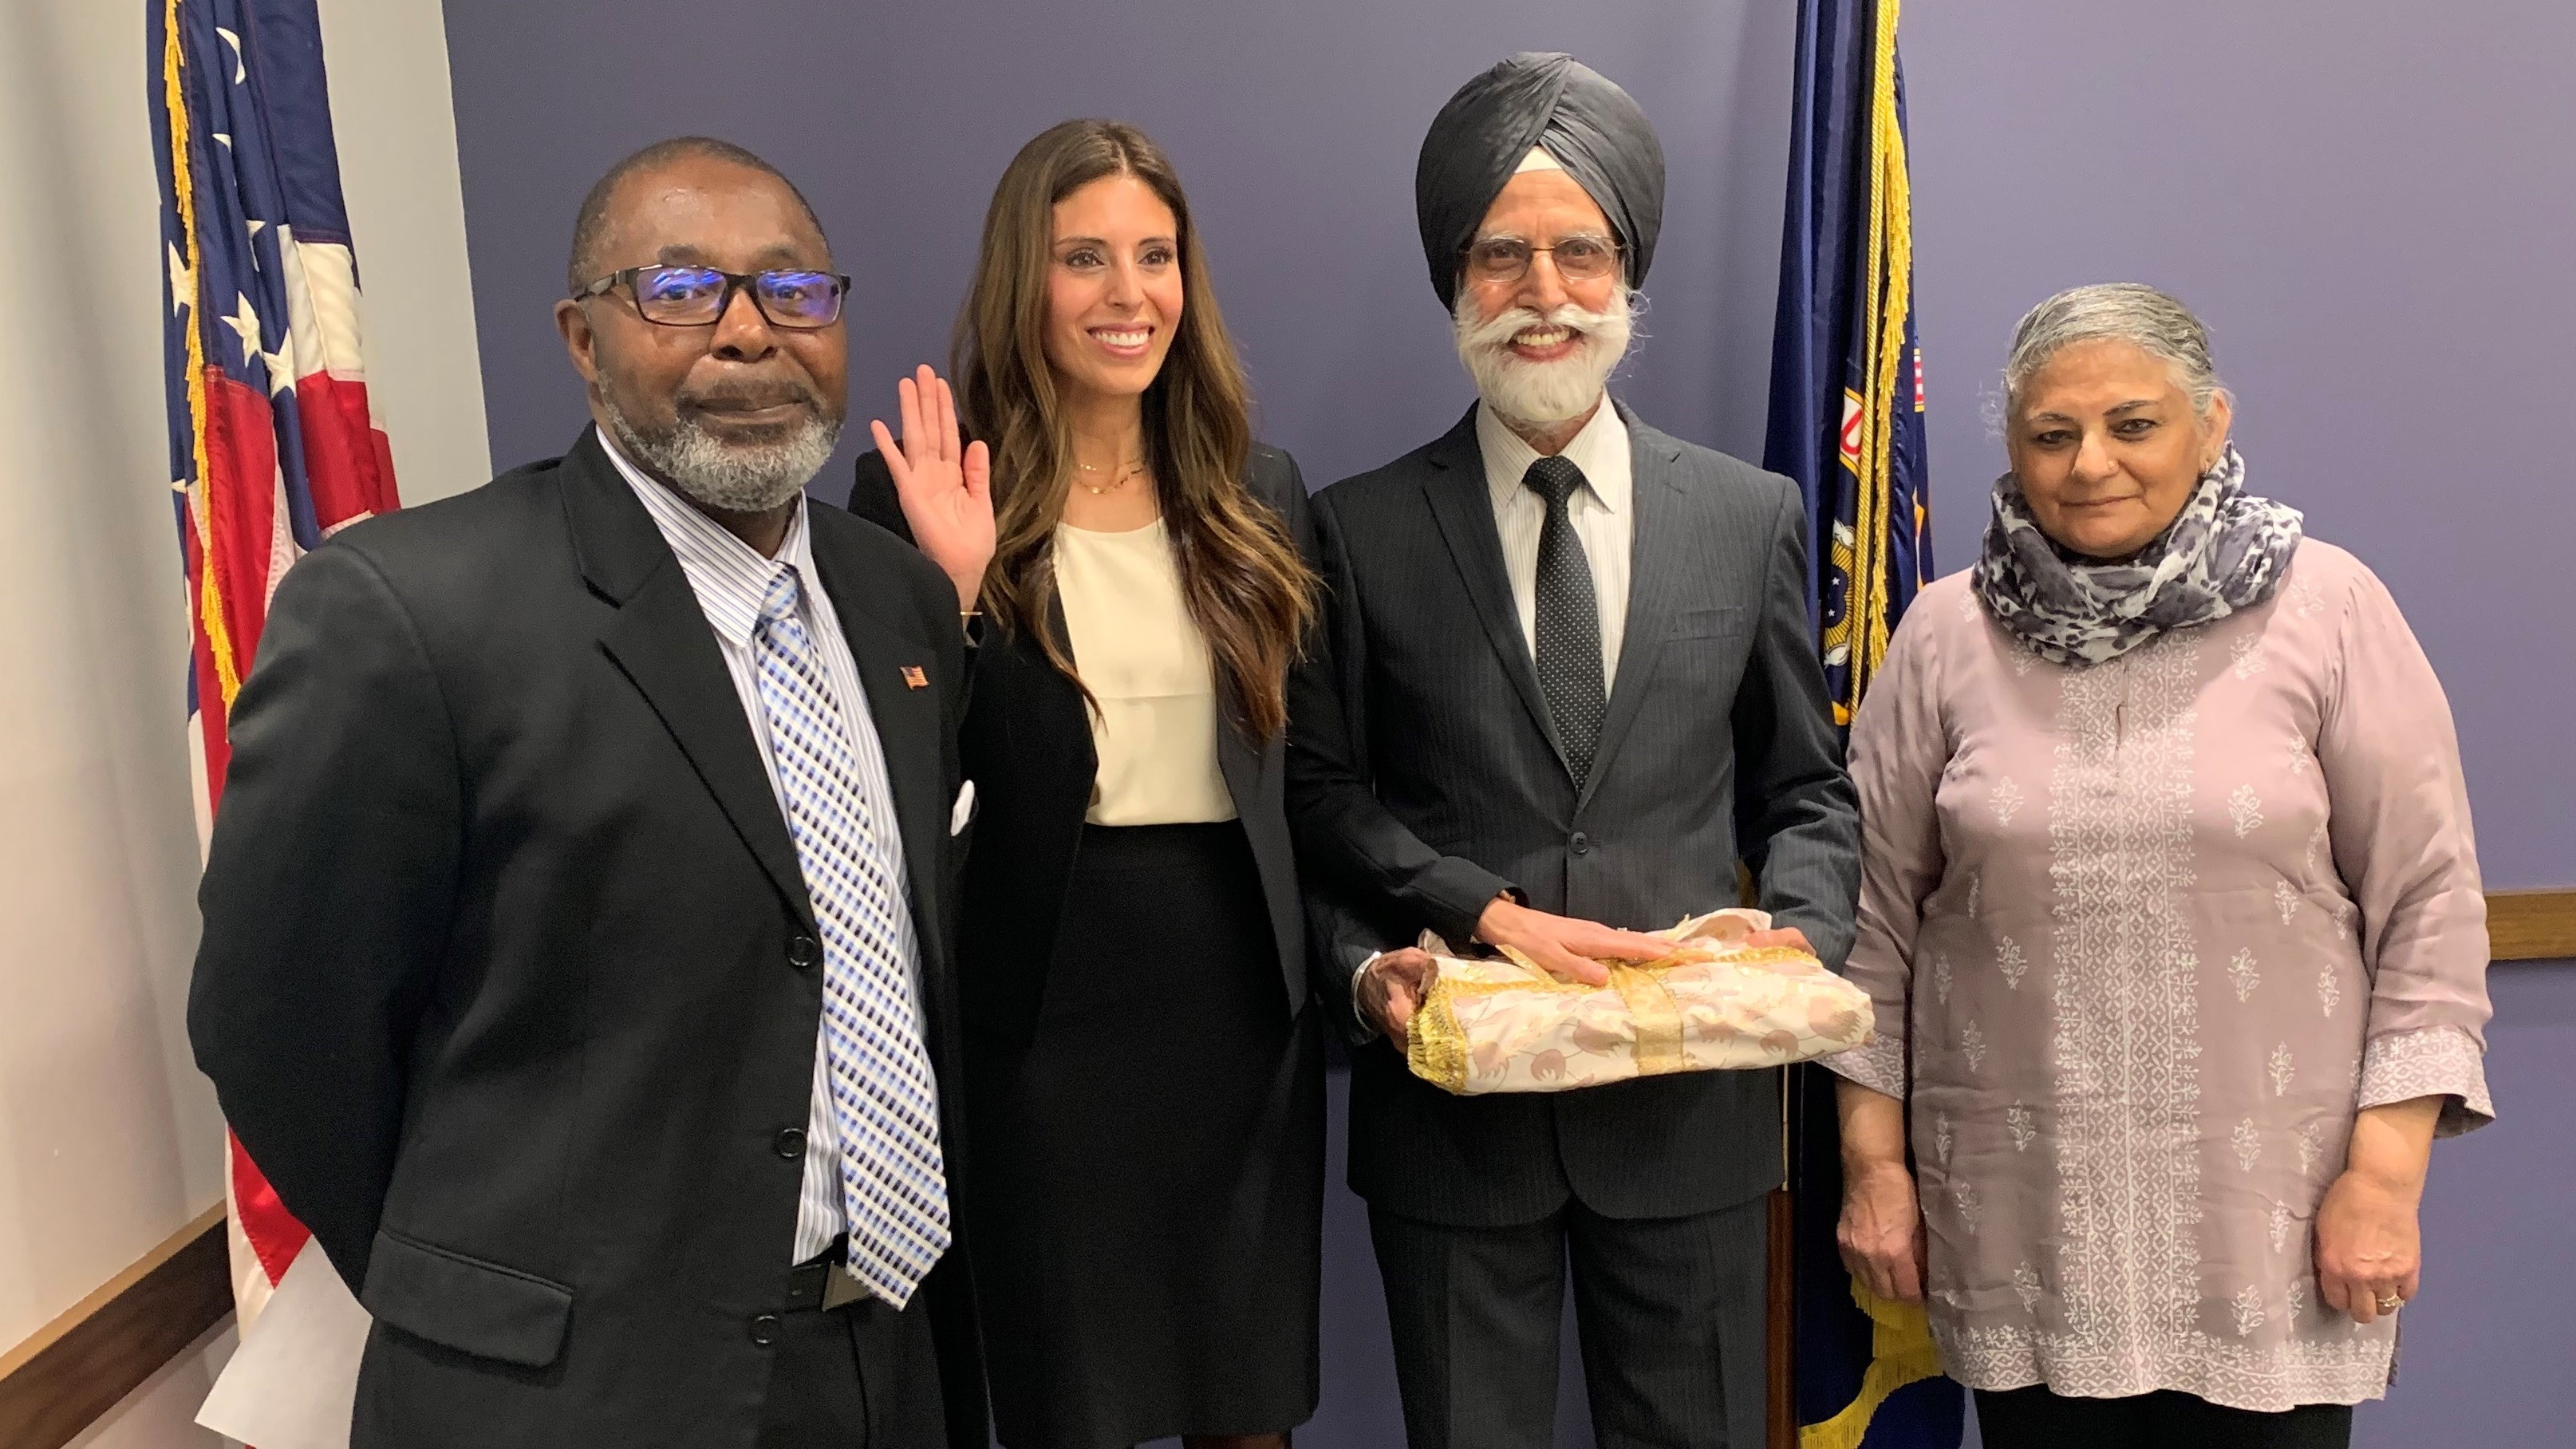 Amrith Kaur Aakre (second from left) poses during her swearing-in ceremony as the director of the EEOC’s Chicago District on Jan. 29, with Thomas Colclough, director of field management programs, and her parents Rajinder and Navinder Mago. 